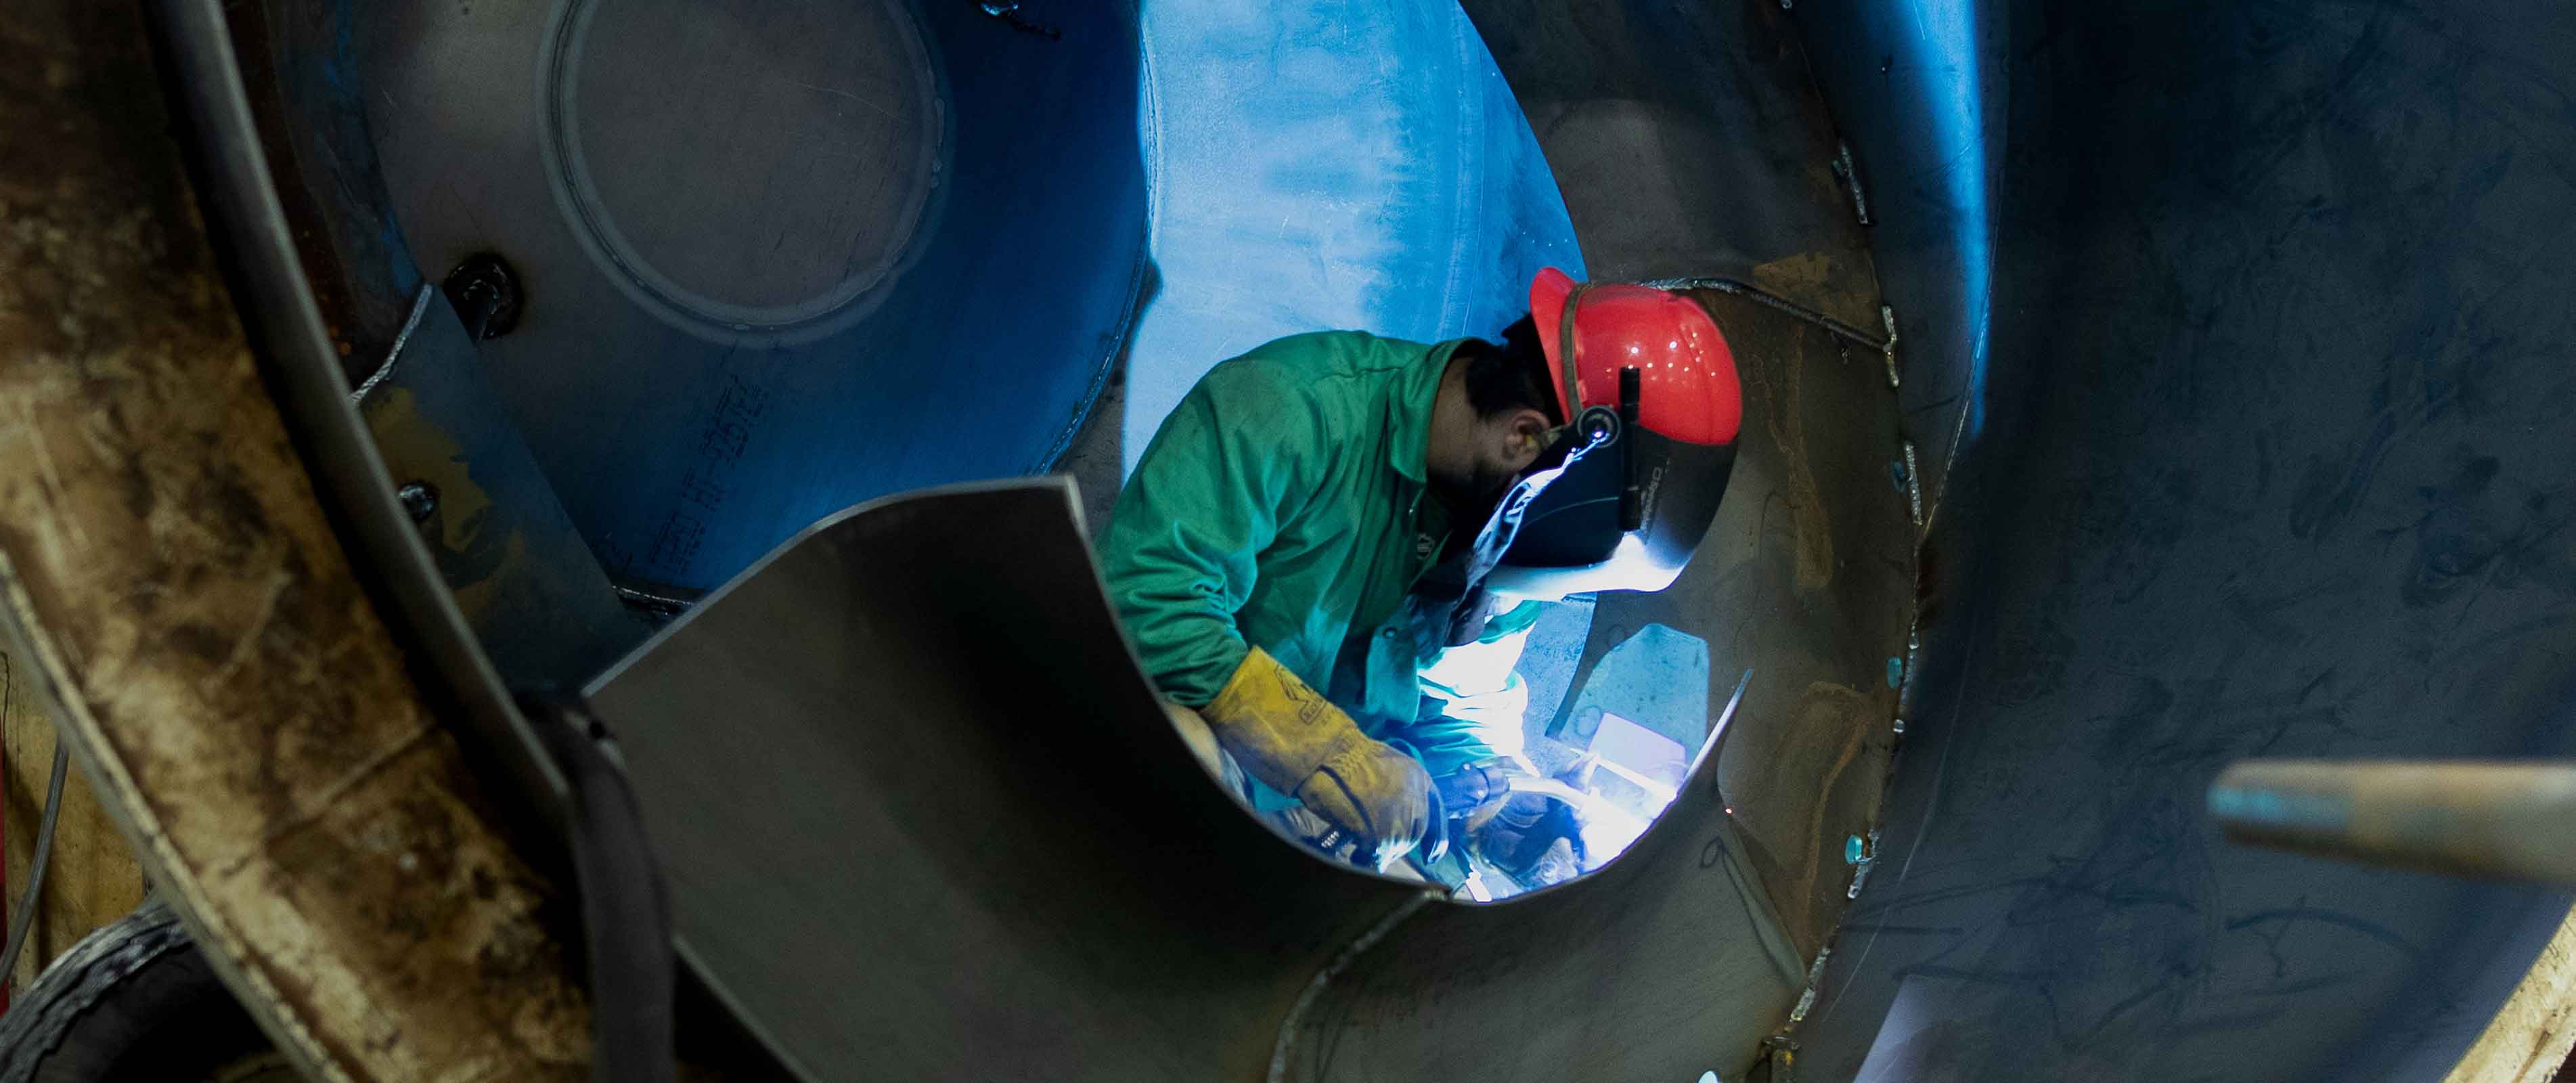 A man in a welding suit working inside of a vehicle.